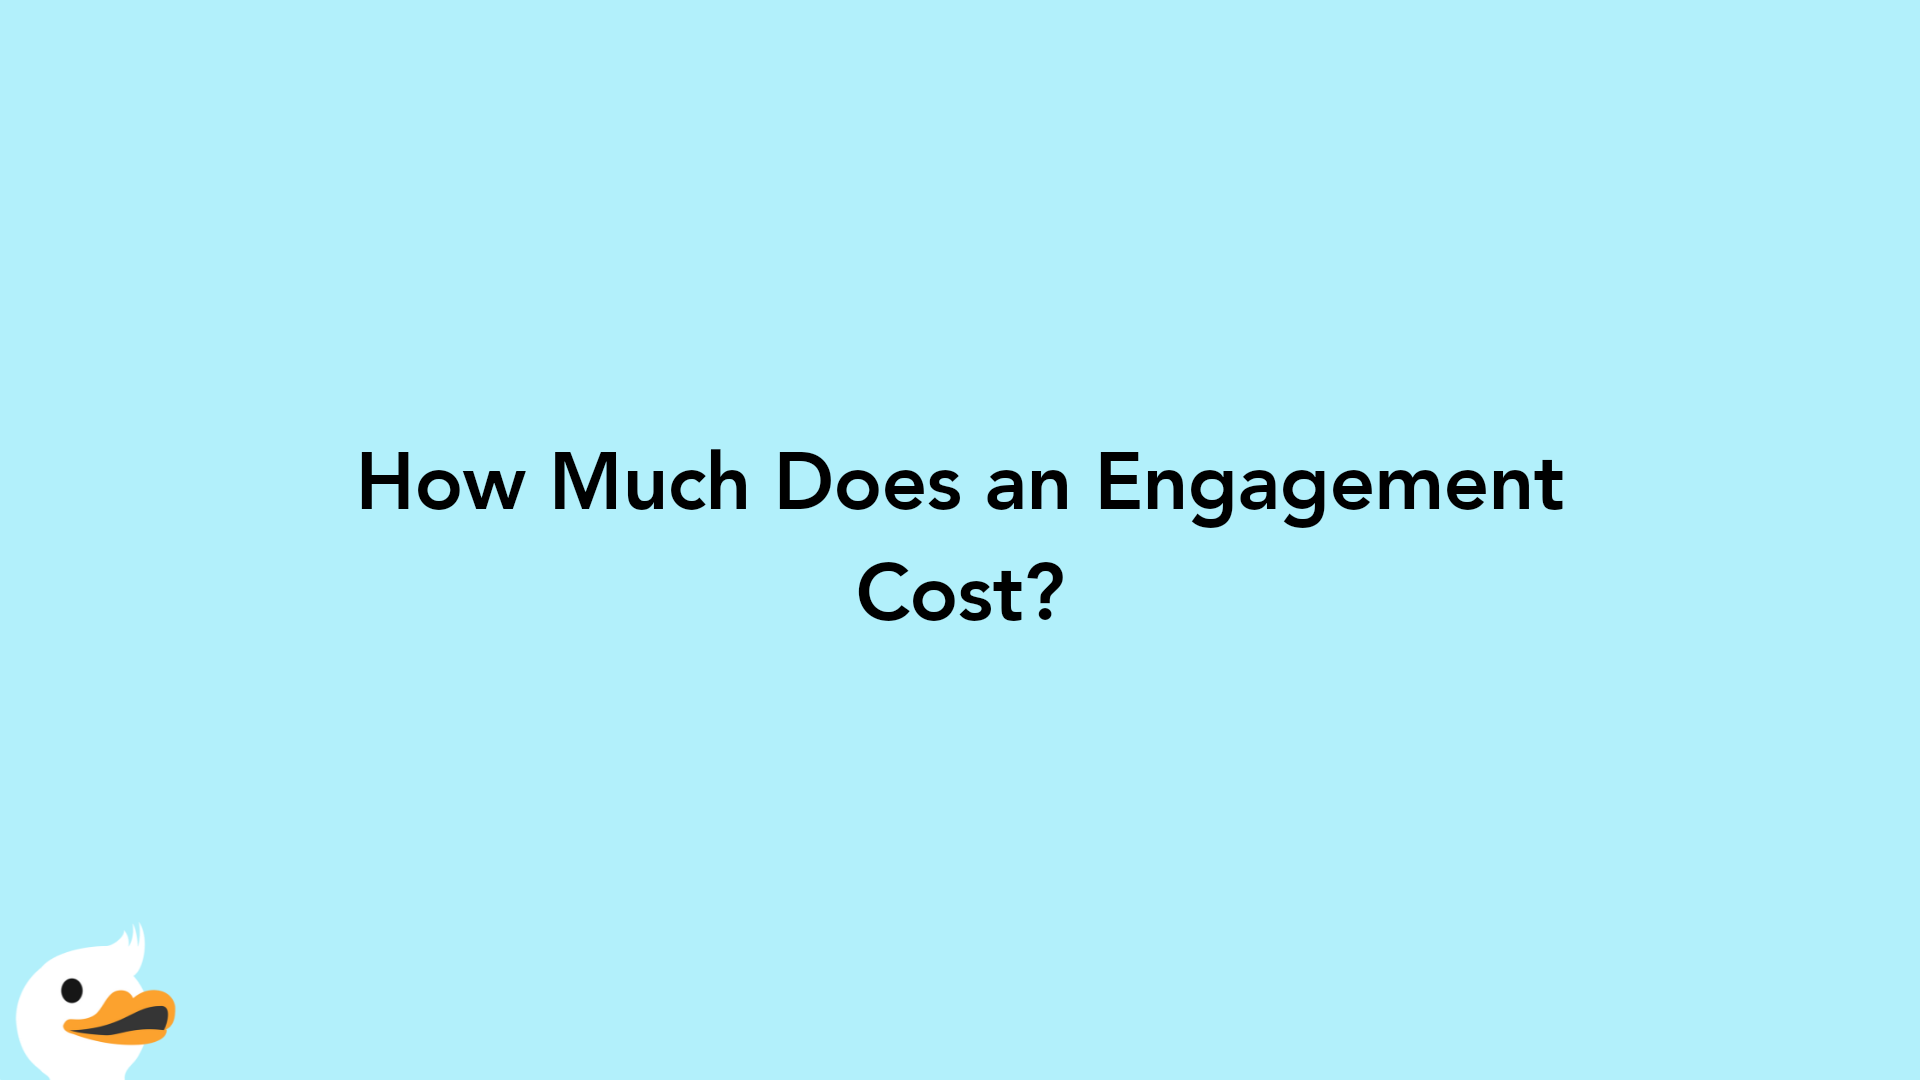 How Much Does an Engagement Cost?